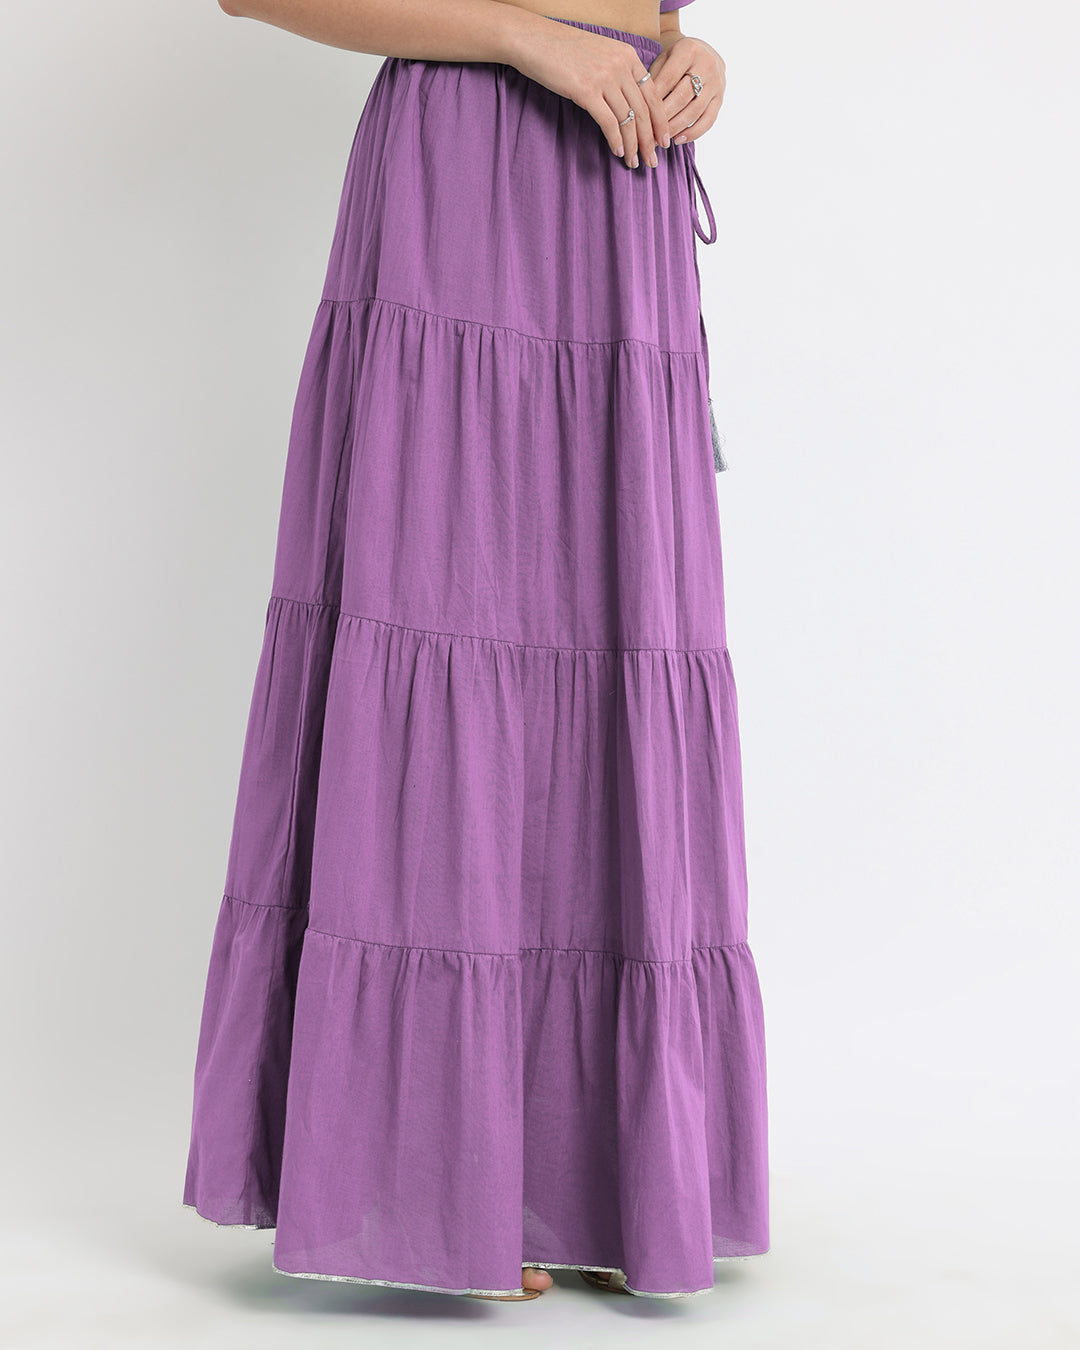 Wisteria Purple Tiered Lace Skirt